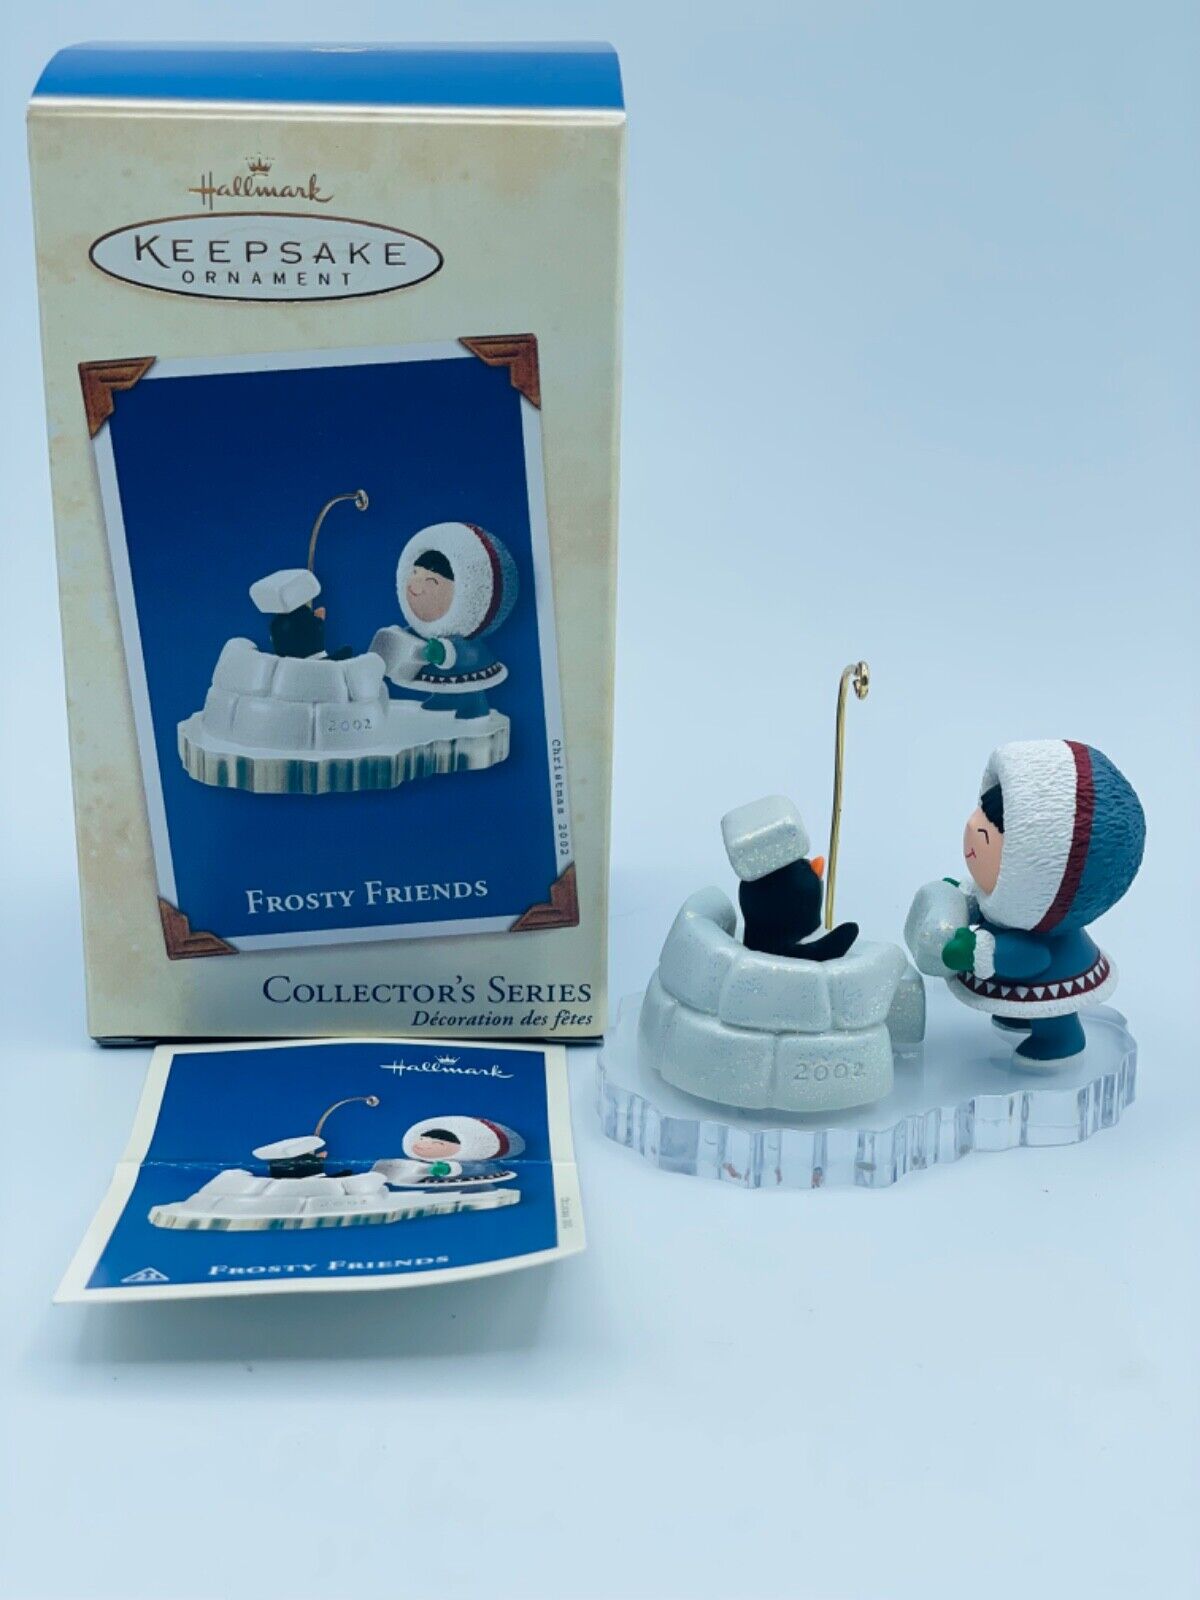 2002 Hallmark Frosty Friends Christmas Ornament with Box 23rd in Series